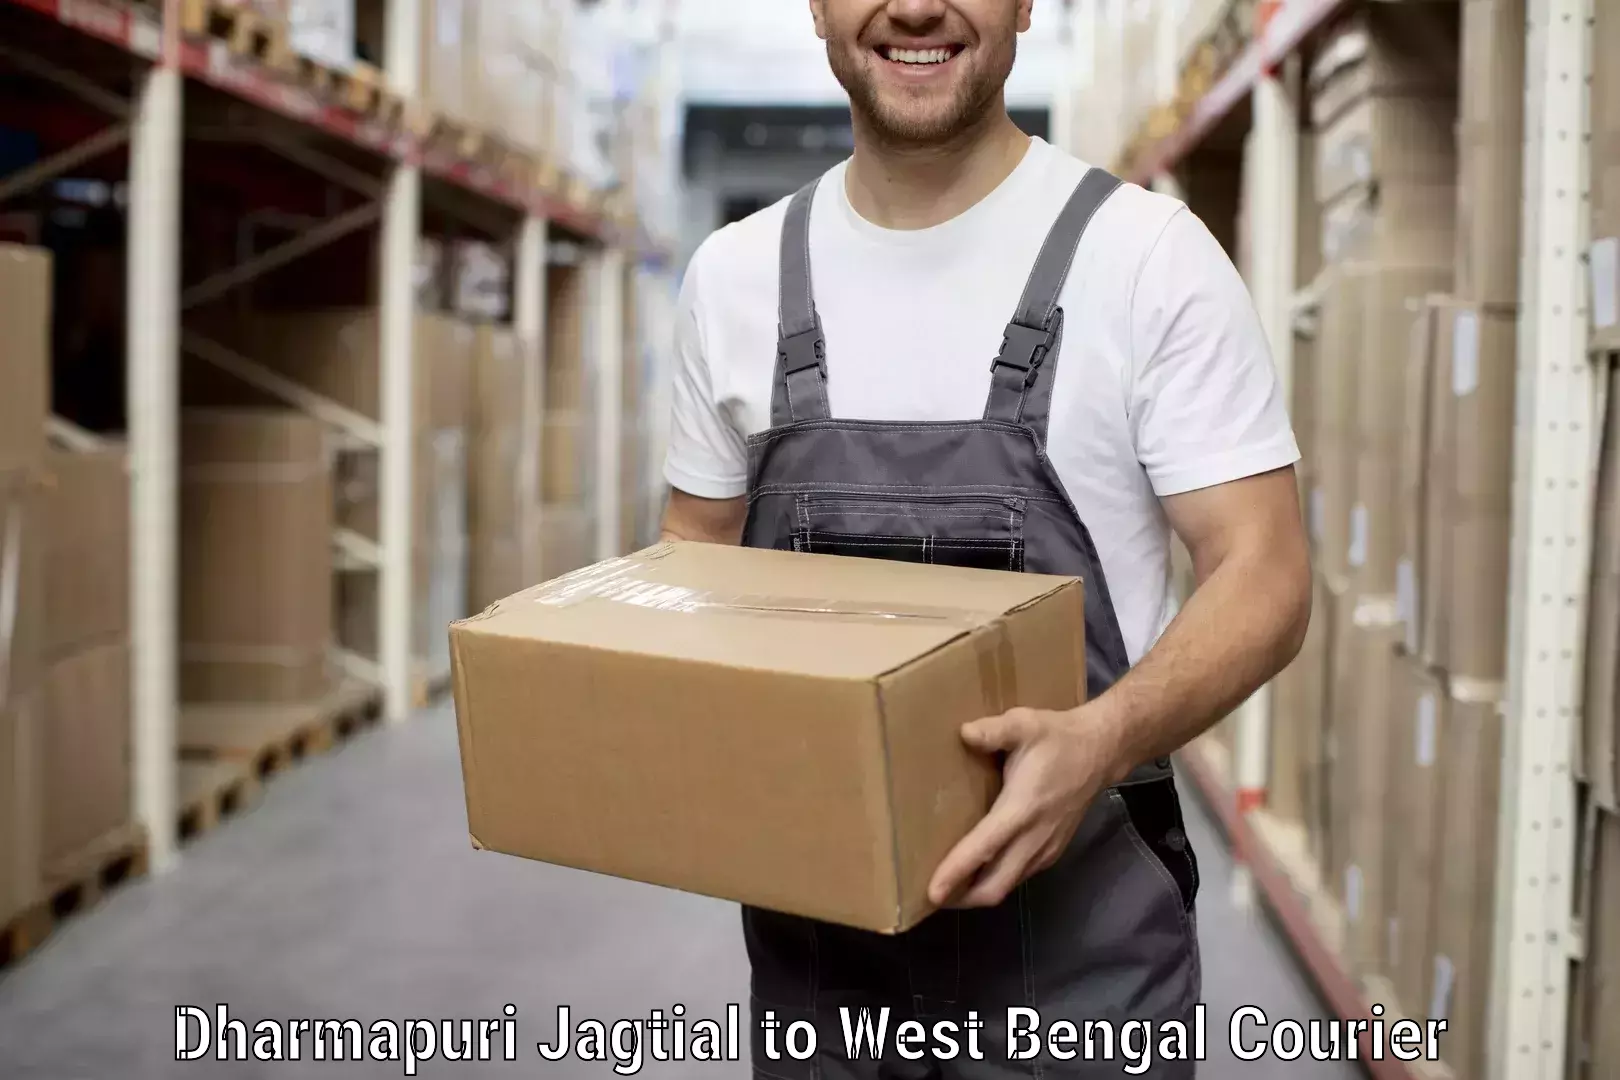 Quality relocation services in Dharmapuri Jagtial to West Bengal